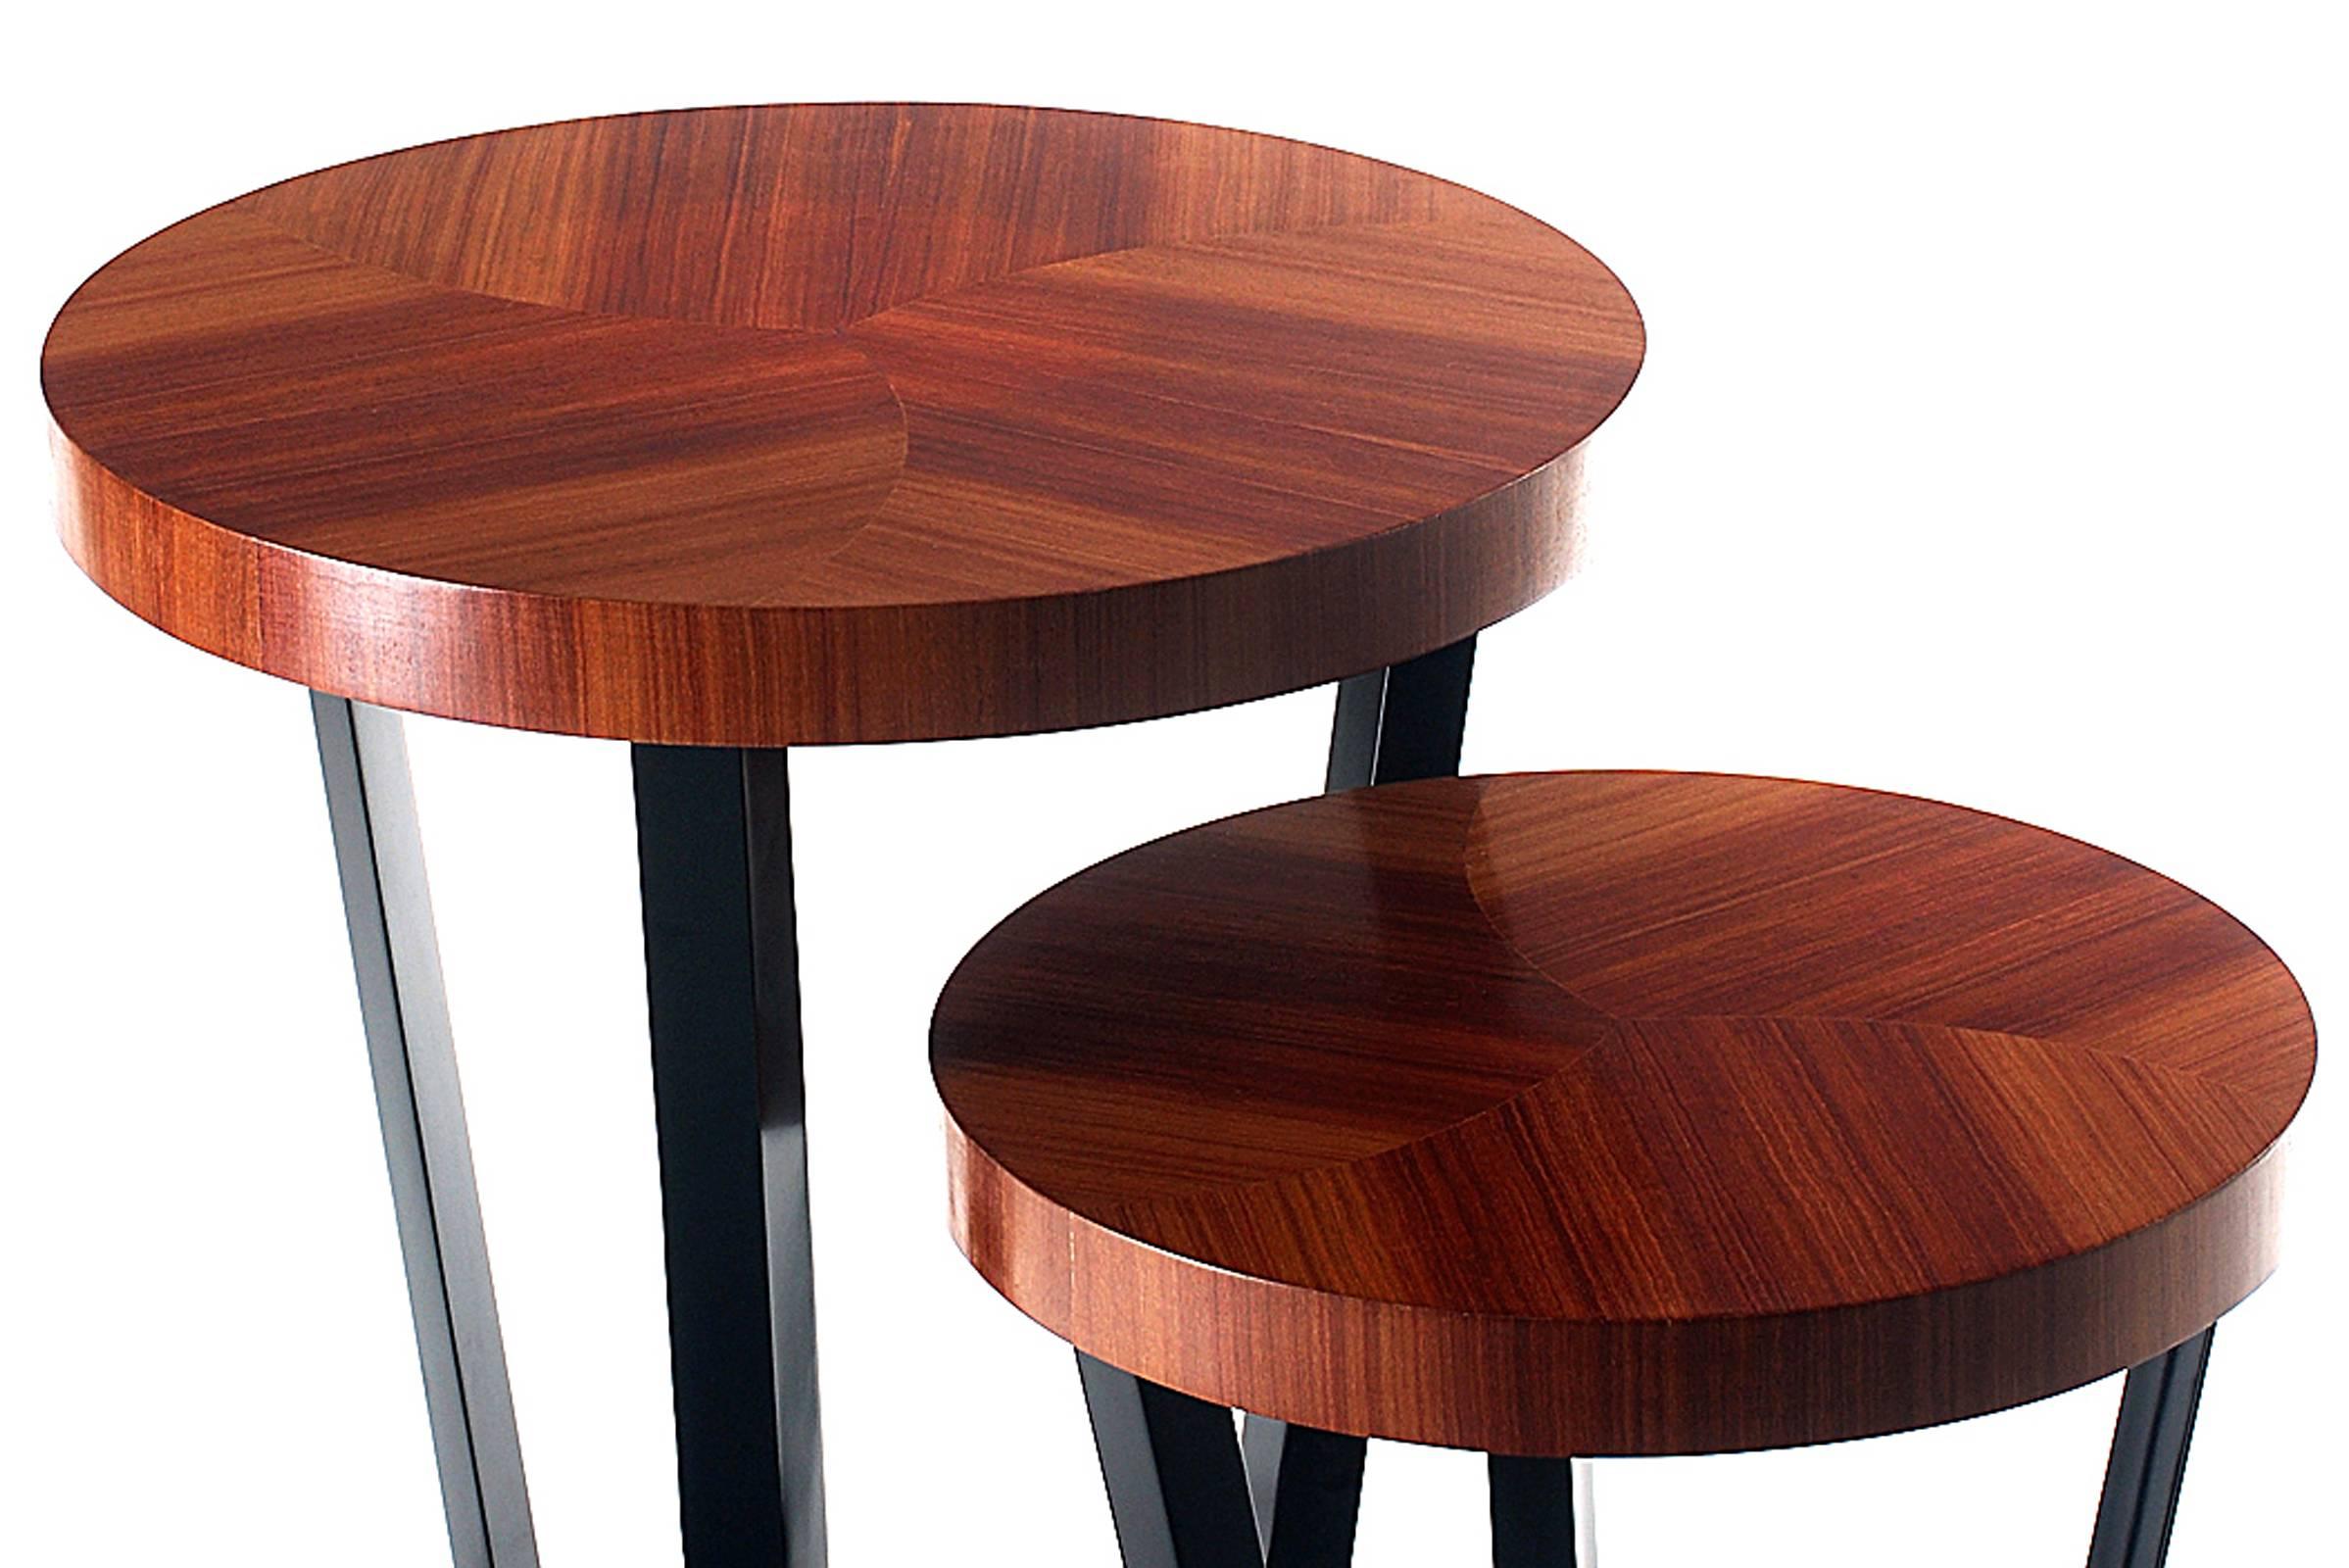 Side table designed set of two made from mahogany,
tops in palisander wood. Black lacquered and varnished
base. Also available with rosewood top.
L: Ø60xH60cm.
S: Ø40xH40cm.
